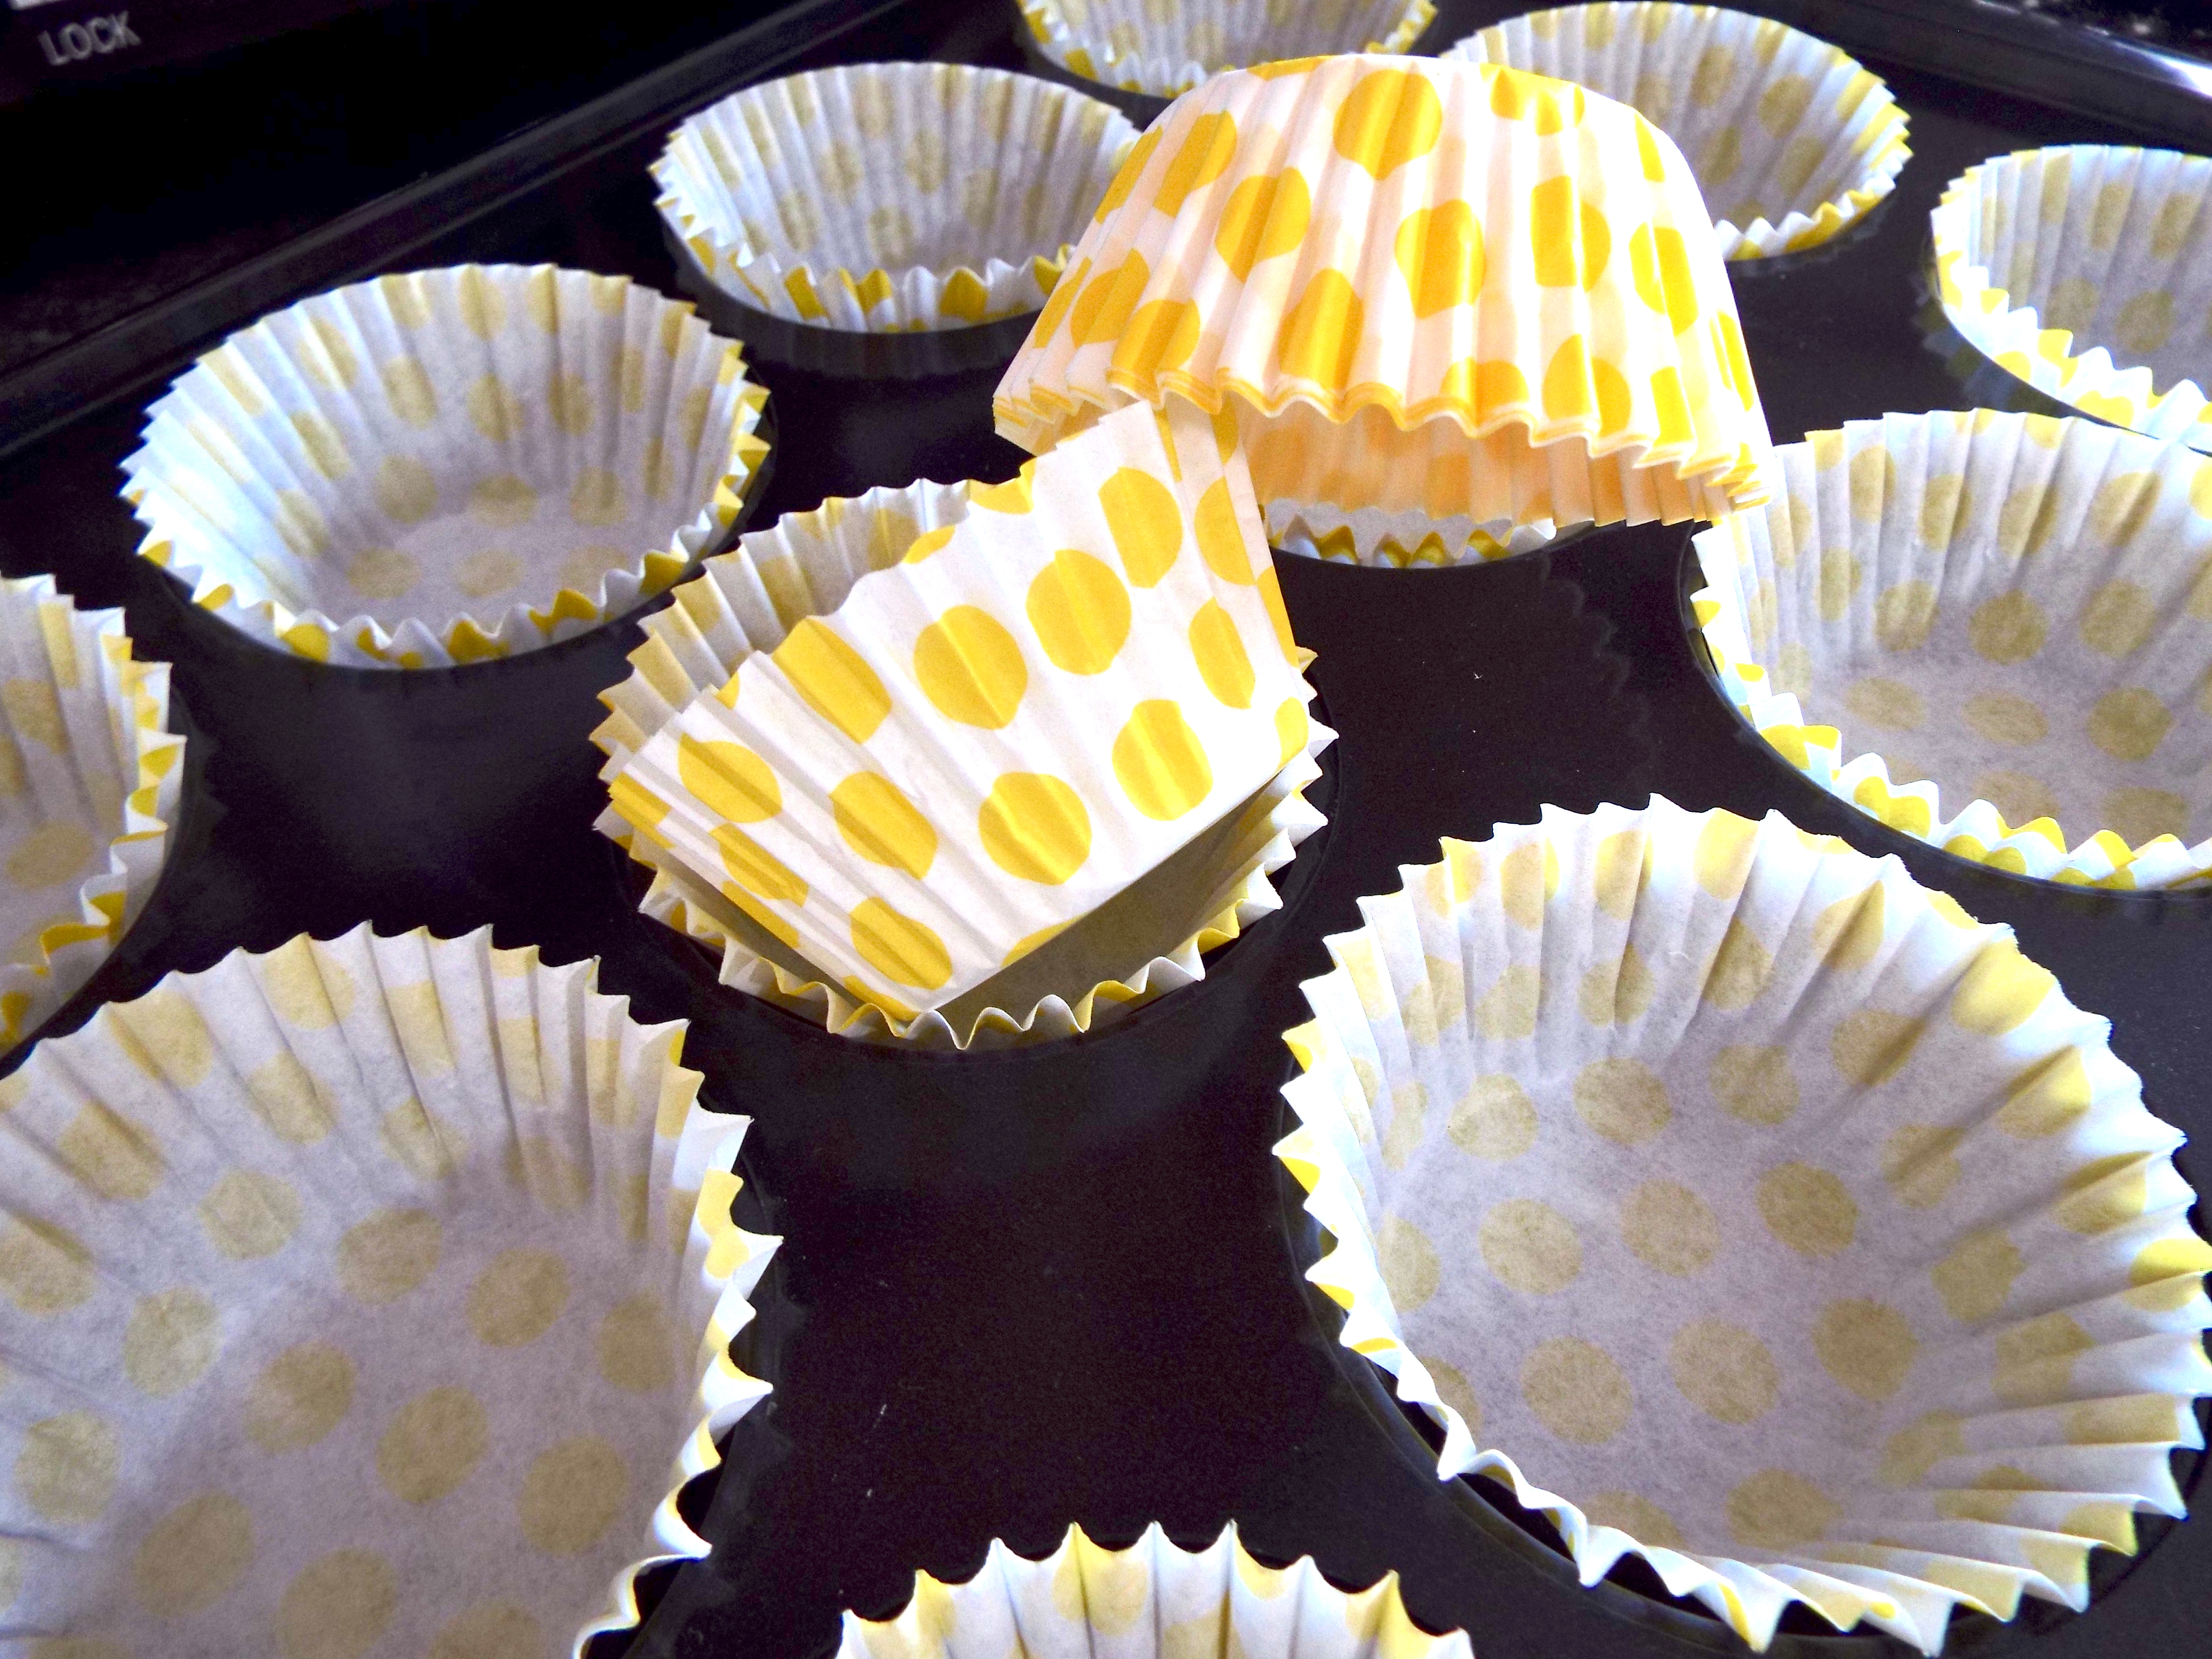 Yellow polka dotted cupcake cases ready in baking tray.